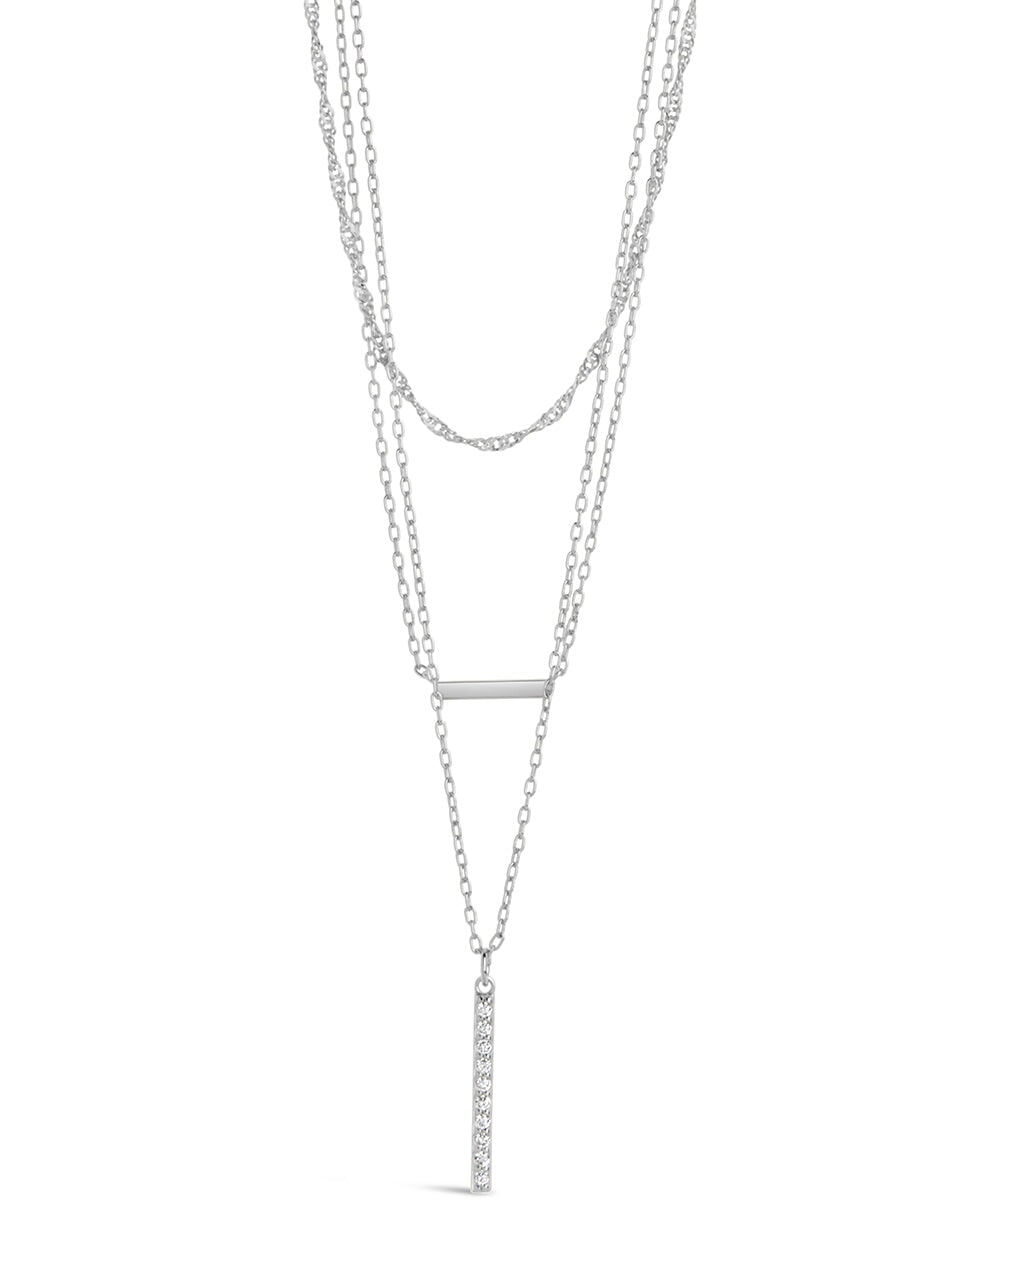 Lottie Layered Necklace Necklace Sterling Forever Silver 